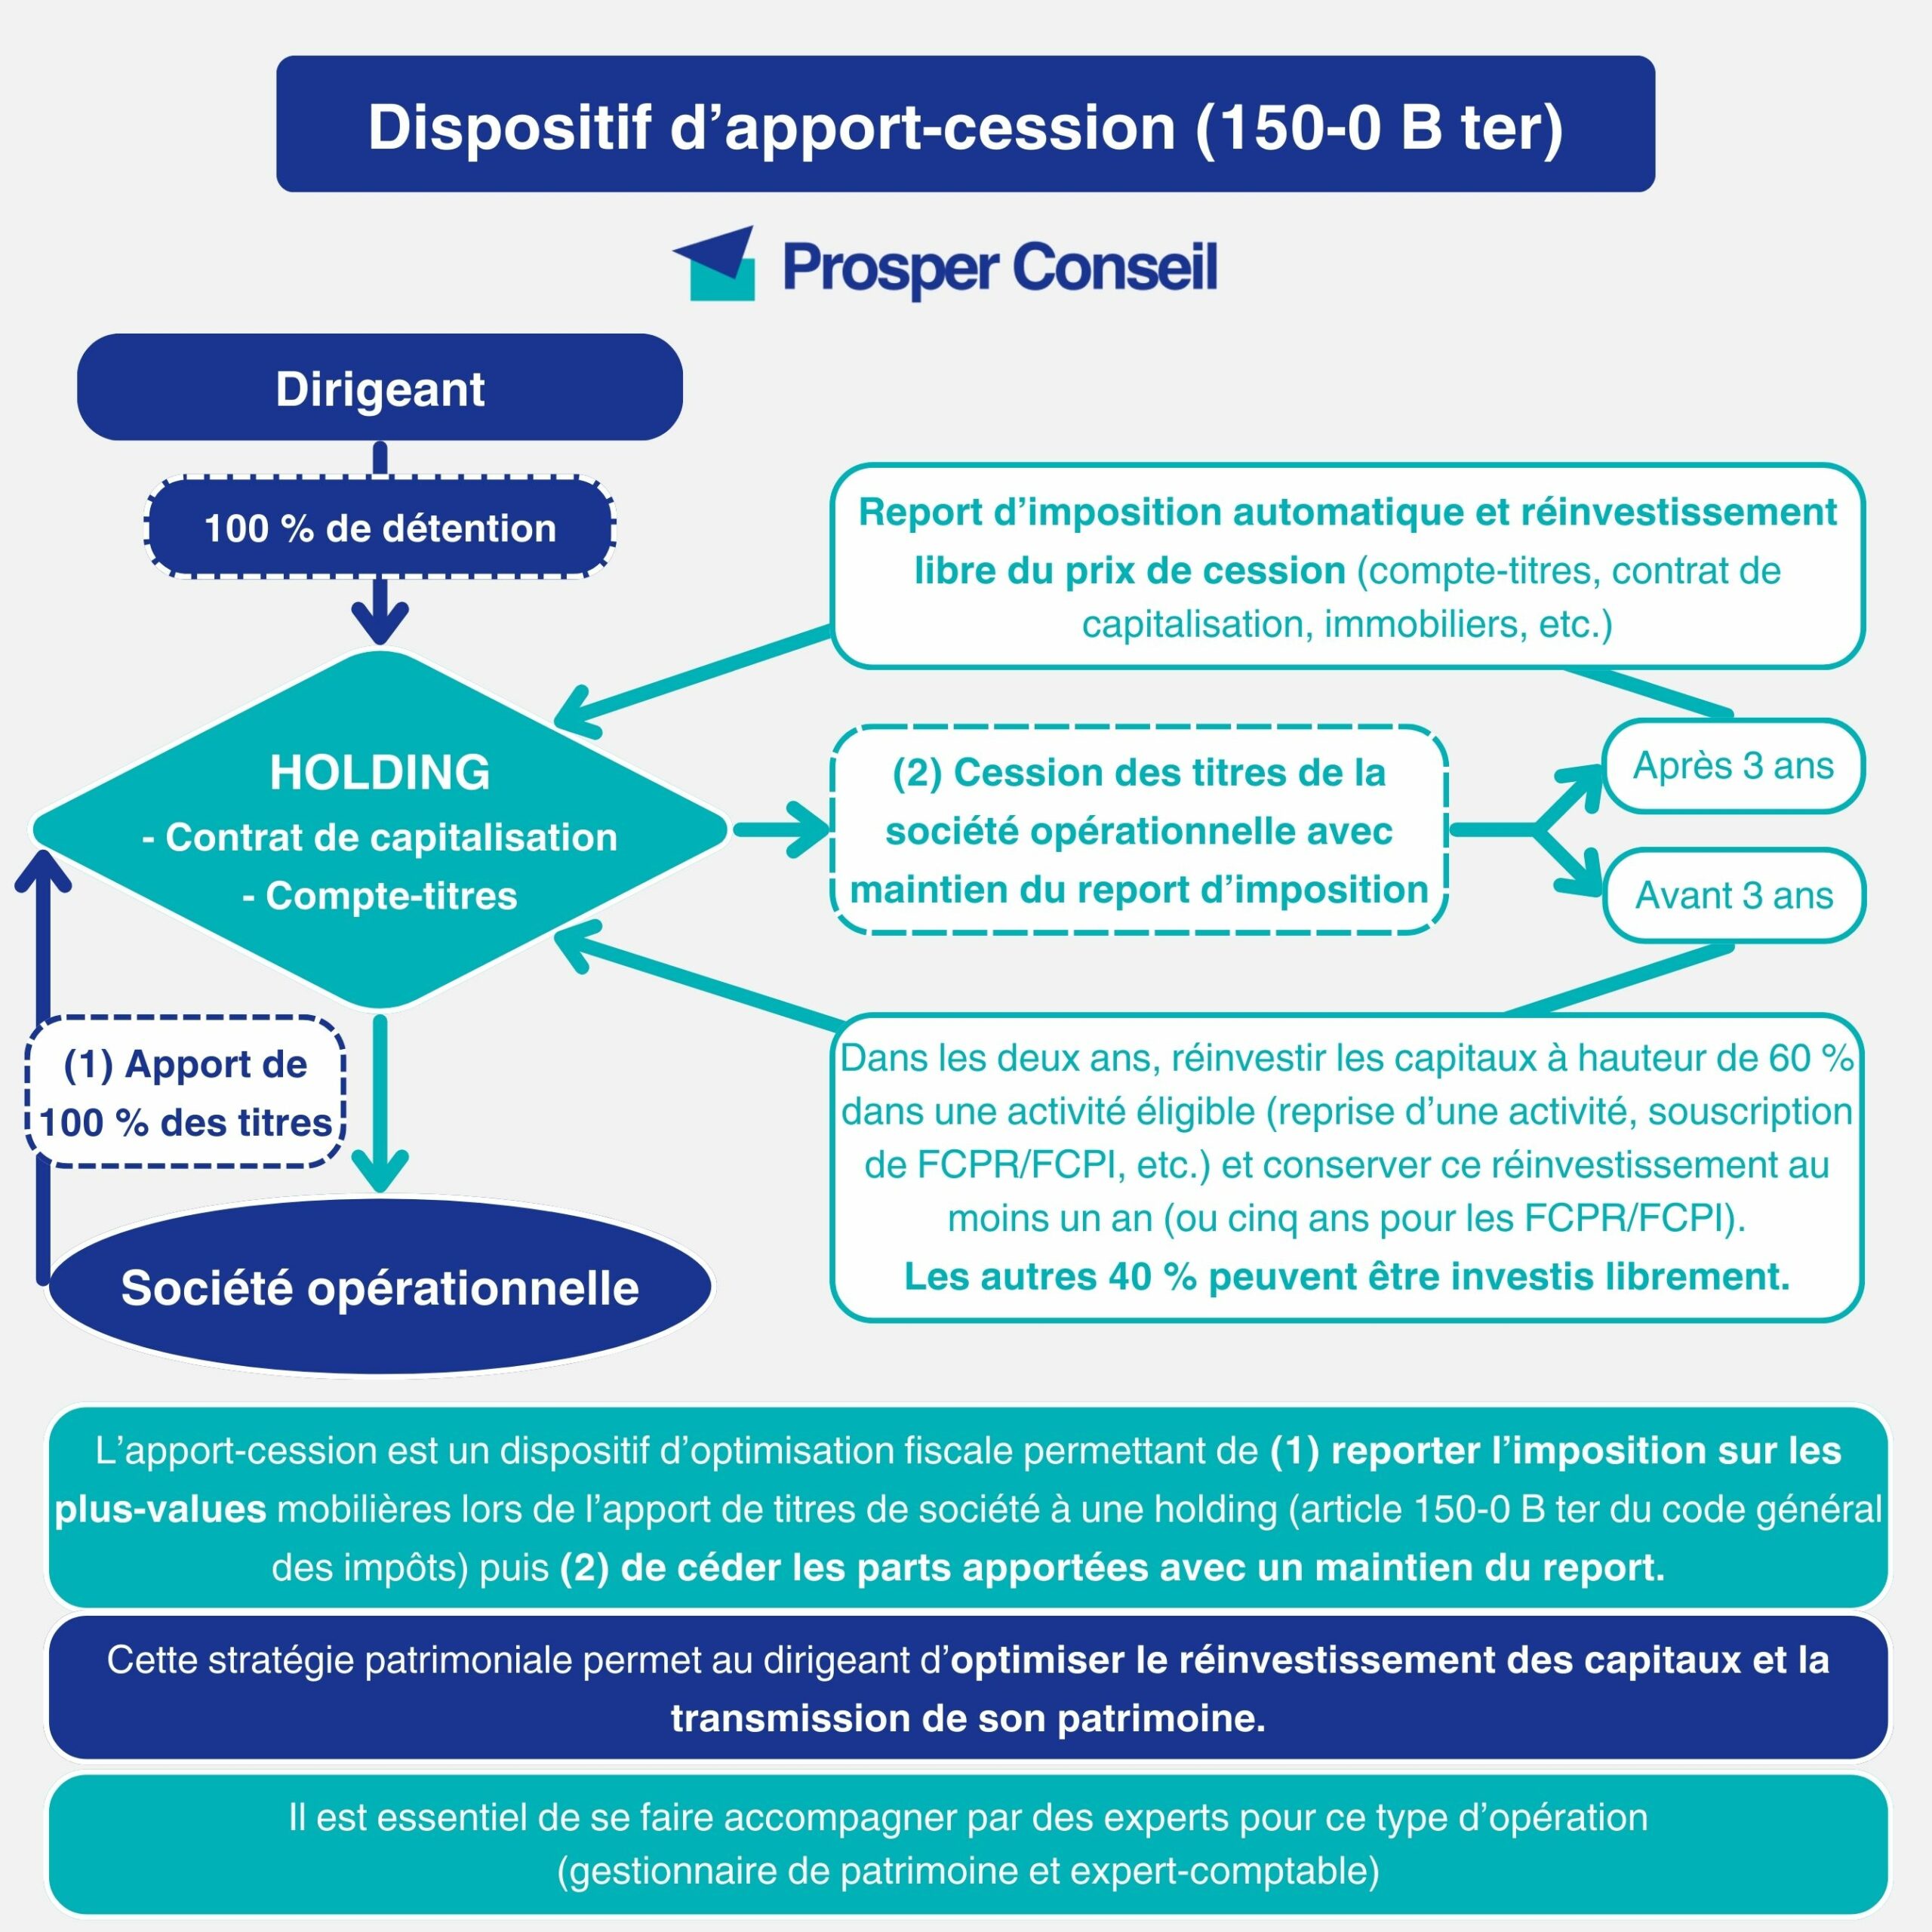 Apport-cession holding